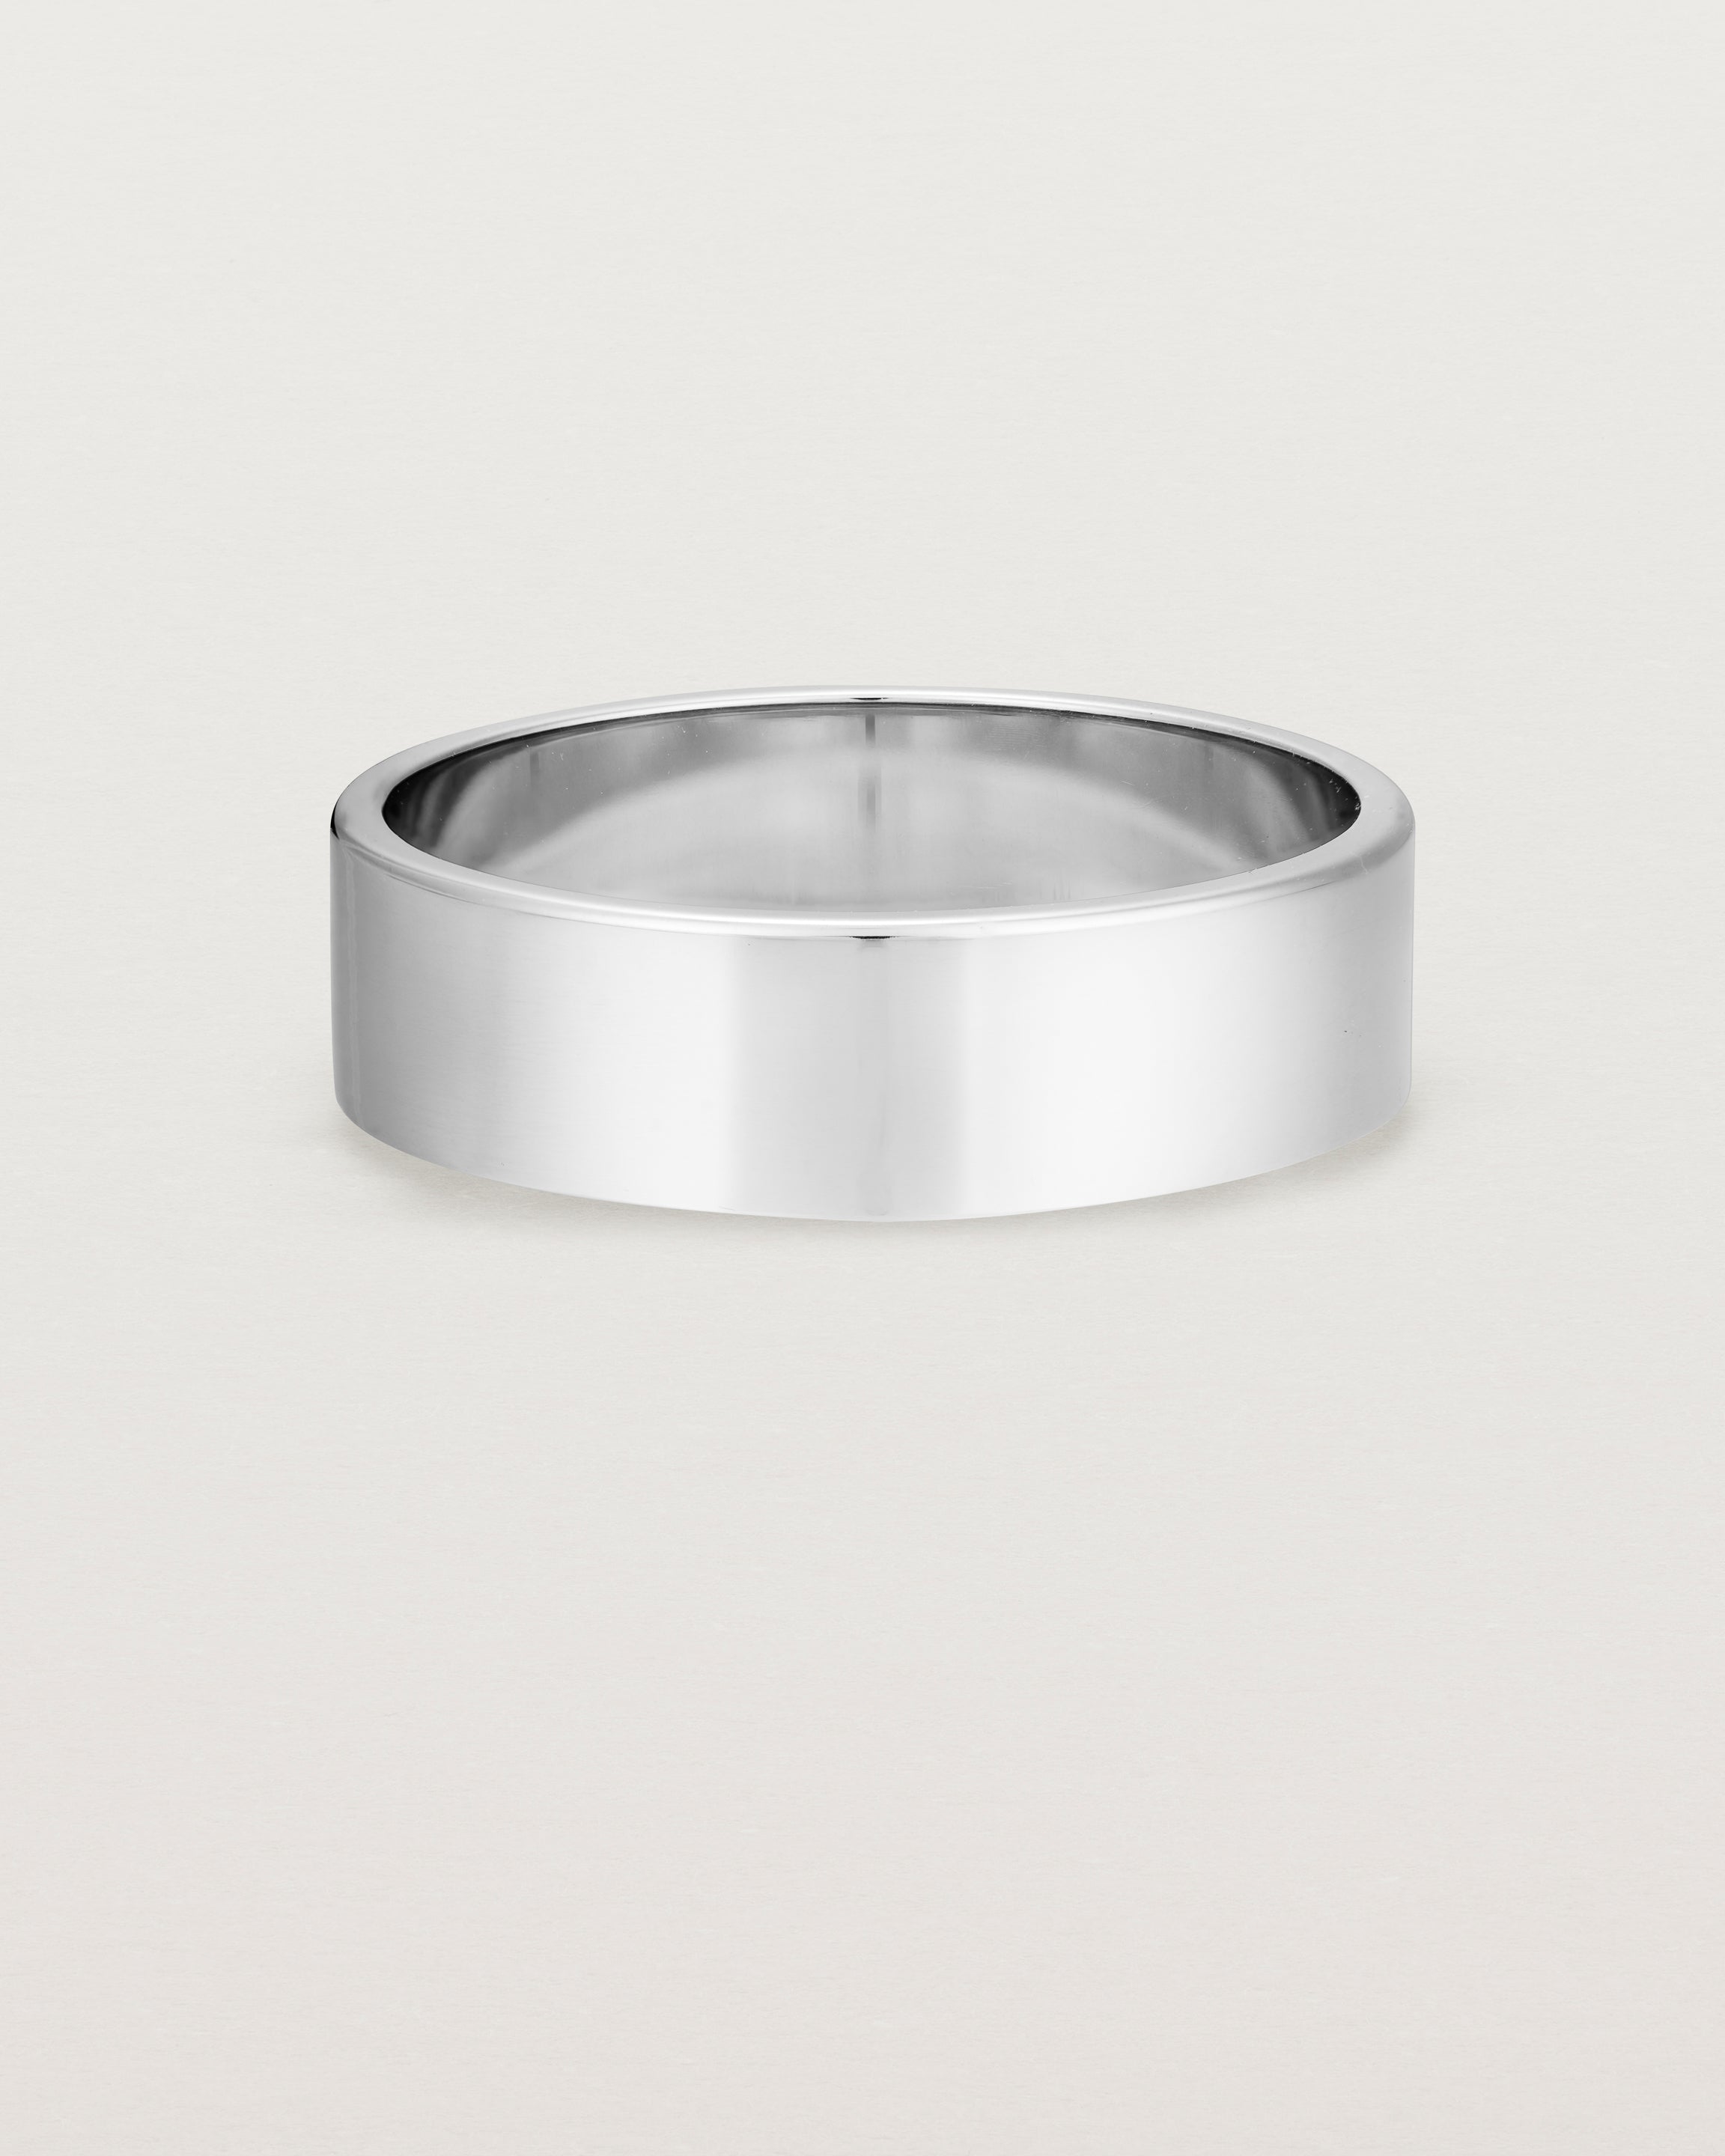 Our square profile, 6mm flat wedding band crafted in sterling silver